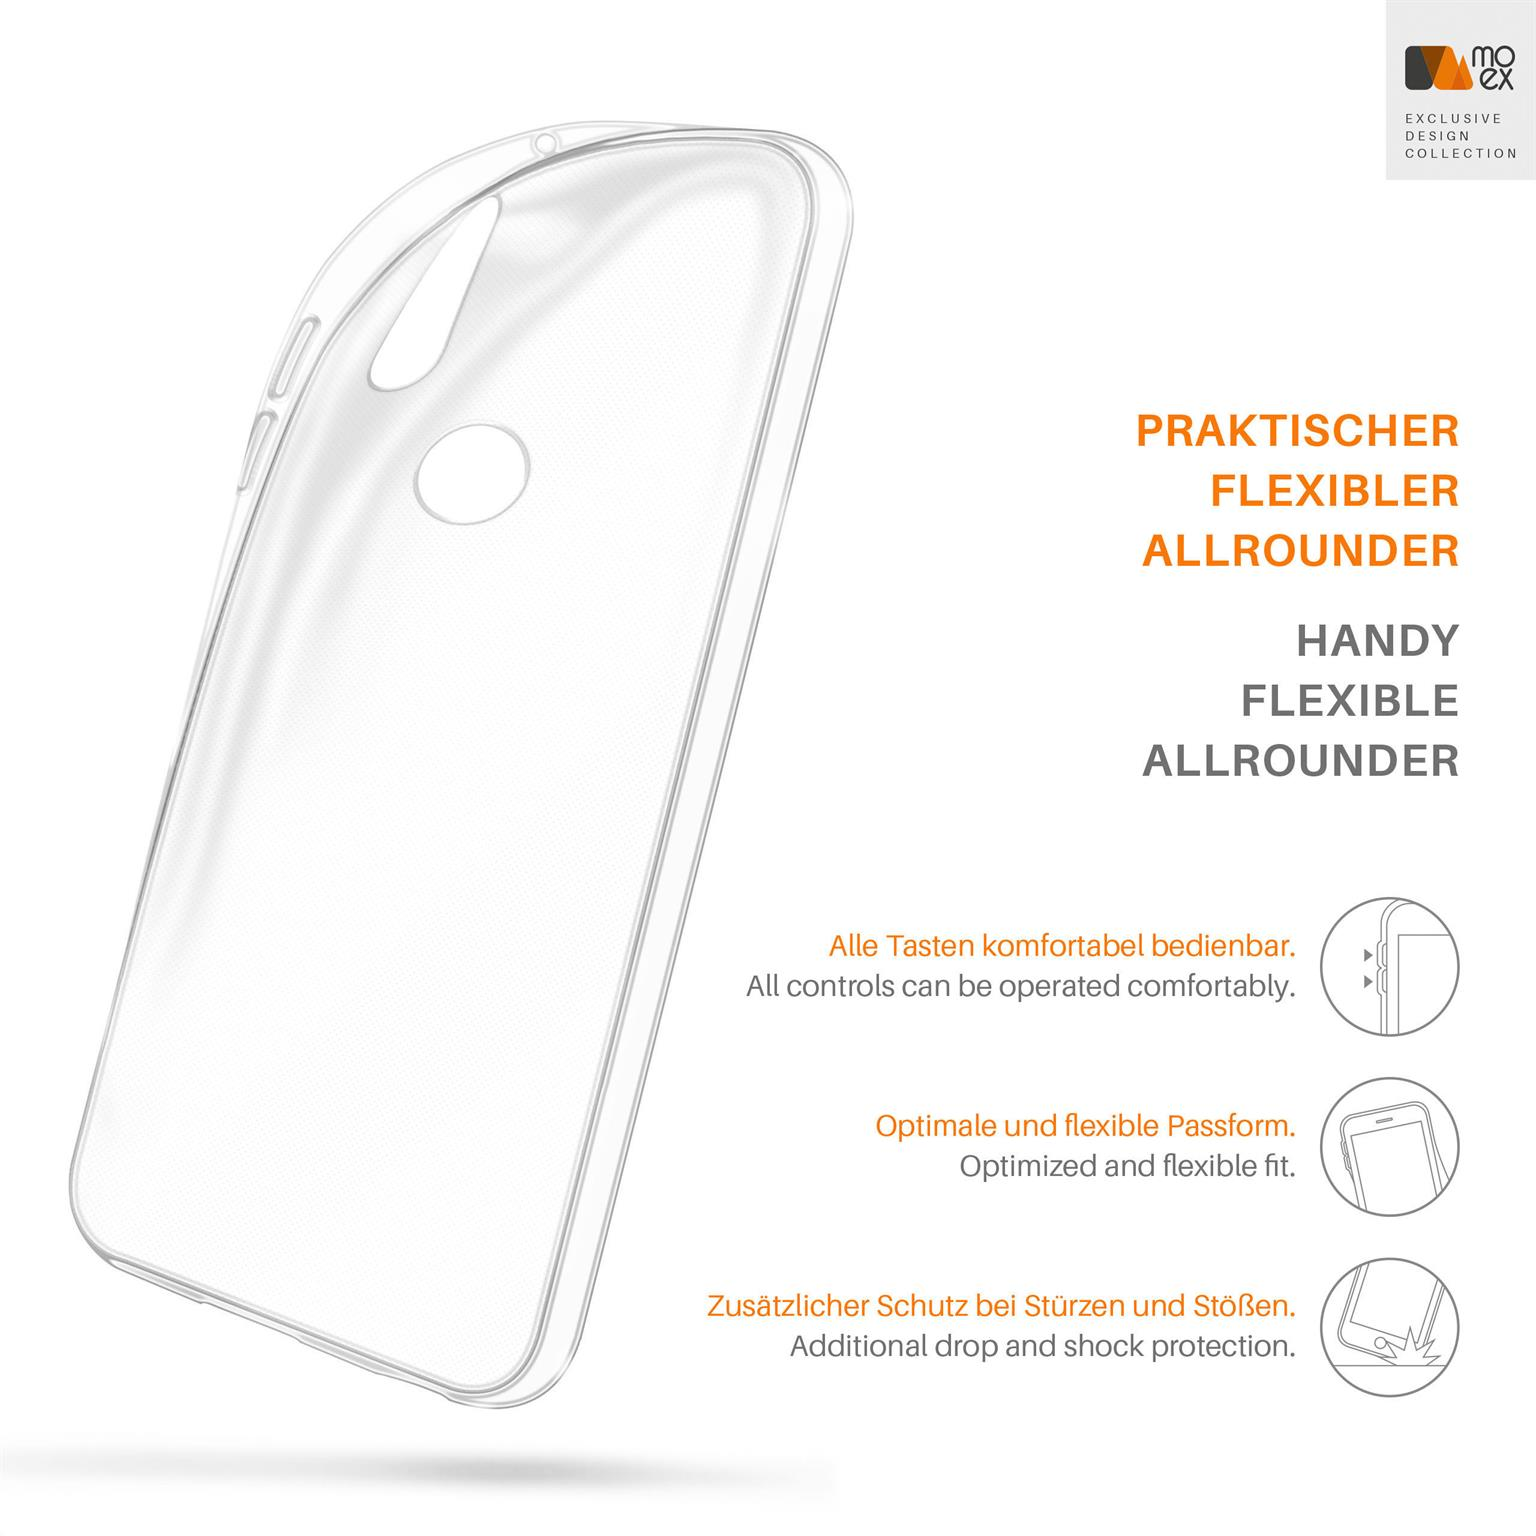 Case, Vision, Motorola, MOEX Backcover, Aero One Crystal-Clear